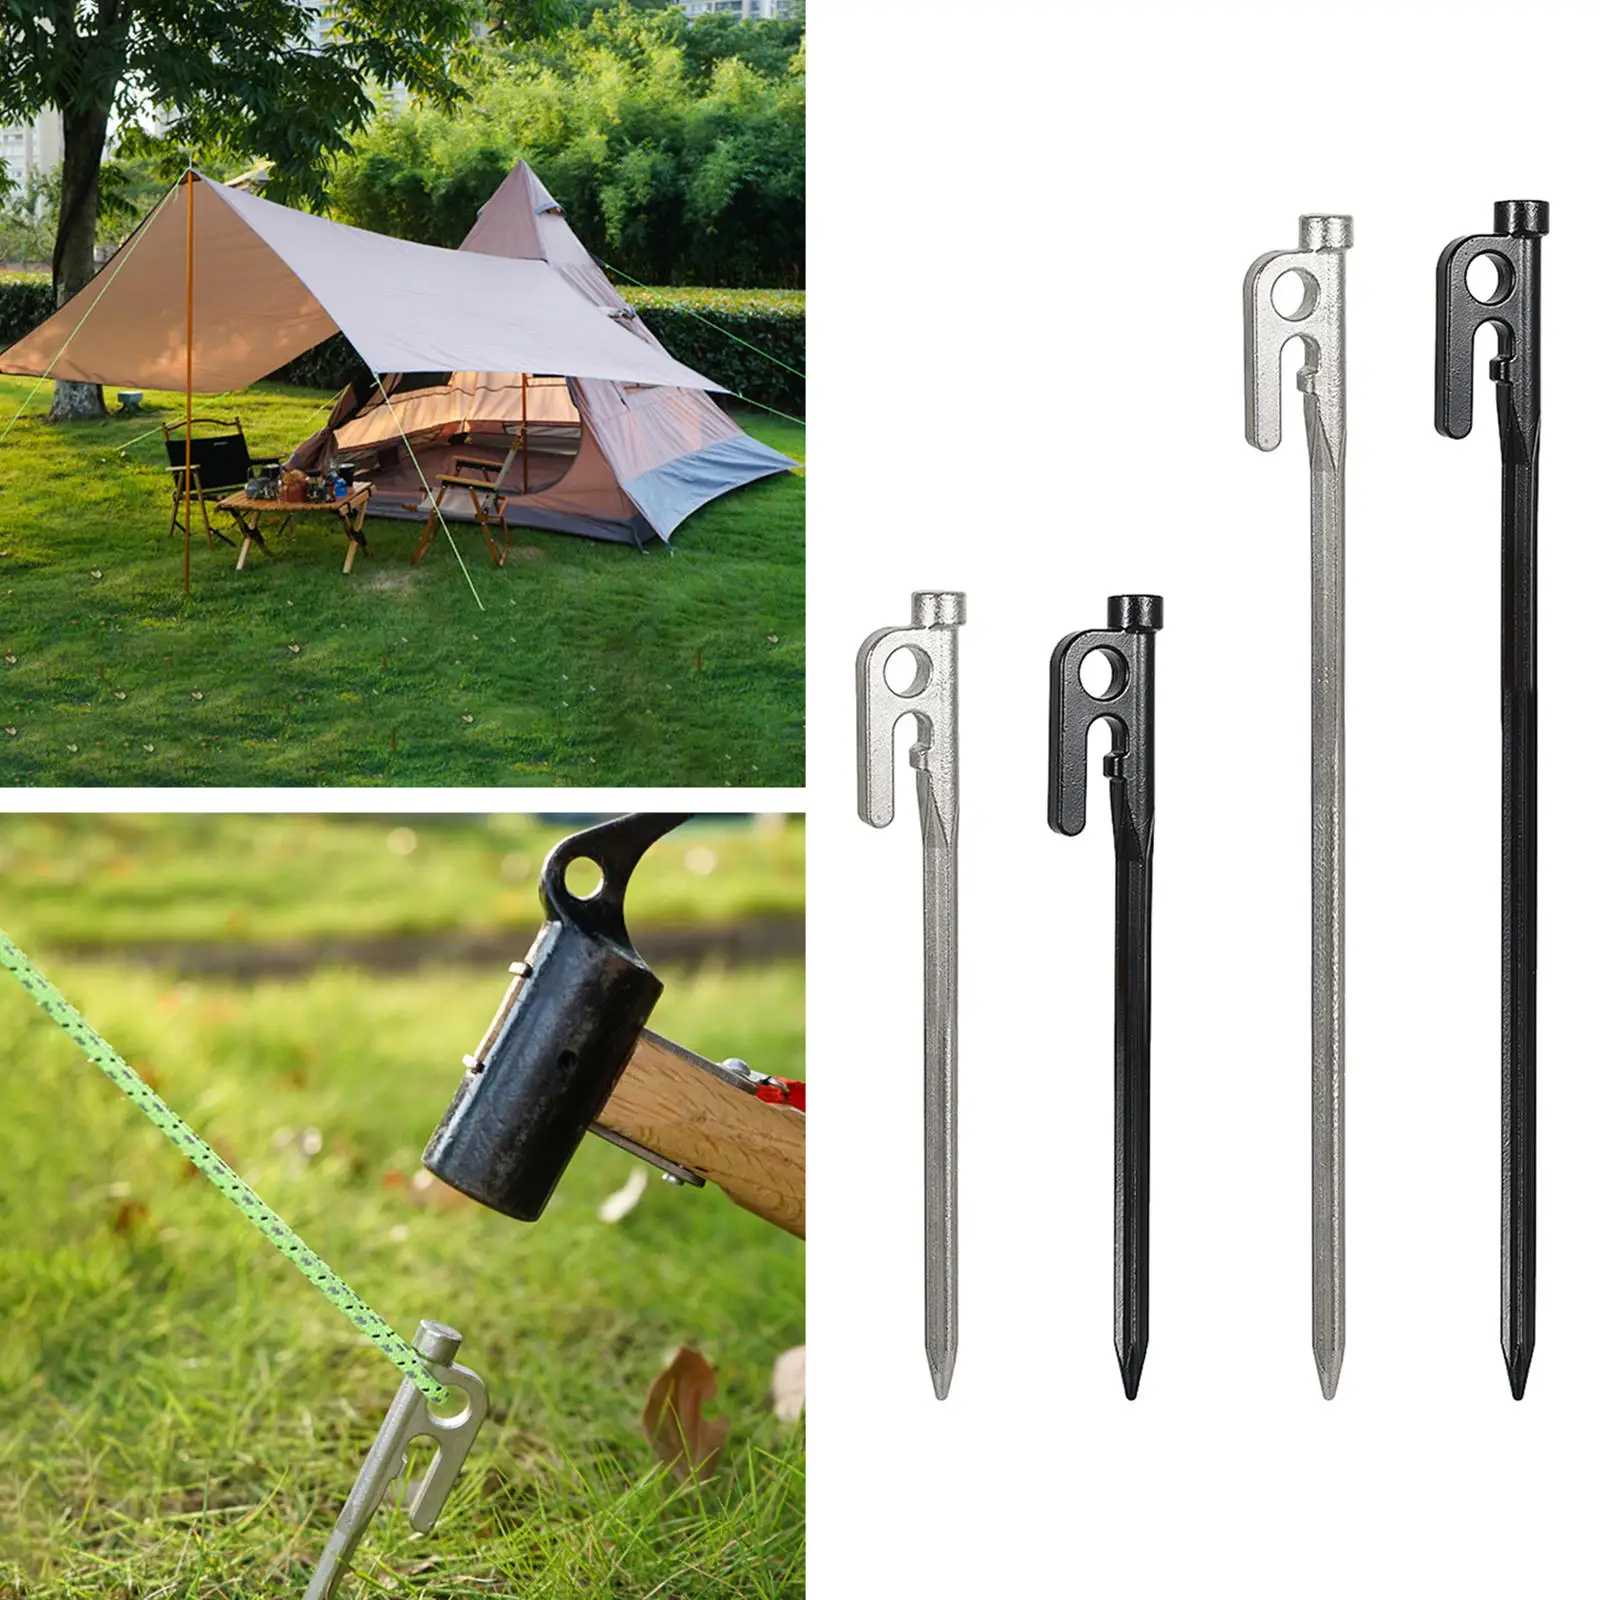 4x Outdoor High Strength Titanium Alloy Tent 201 Stainless Steel Nail Spike Canopy Tent Peg Camping Tent Nail Stakes